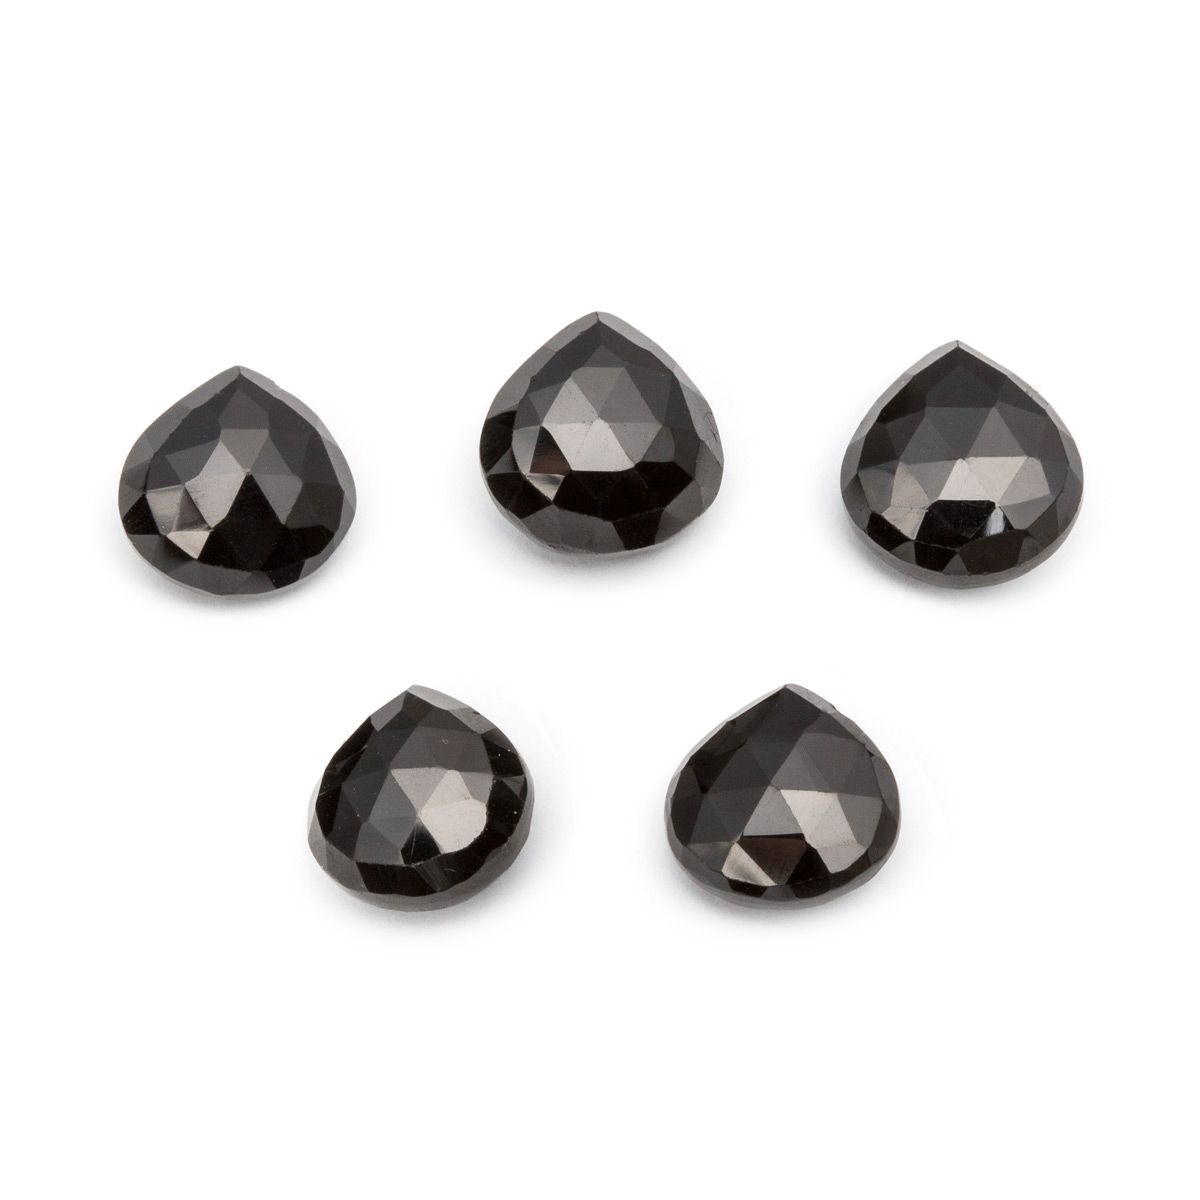 Black Spinel Faceted Heart Briolette Beads - Approx From 9mm